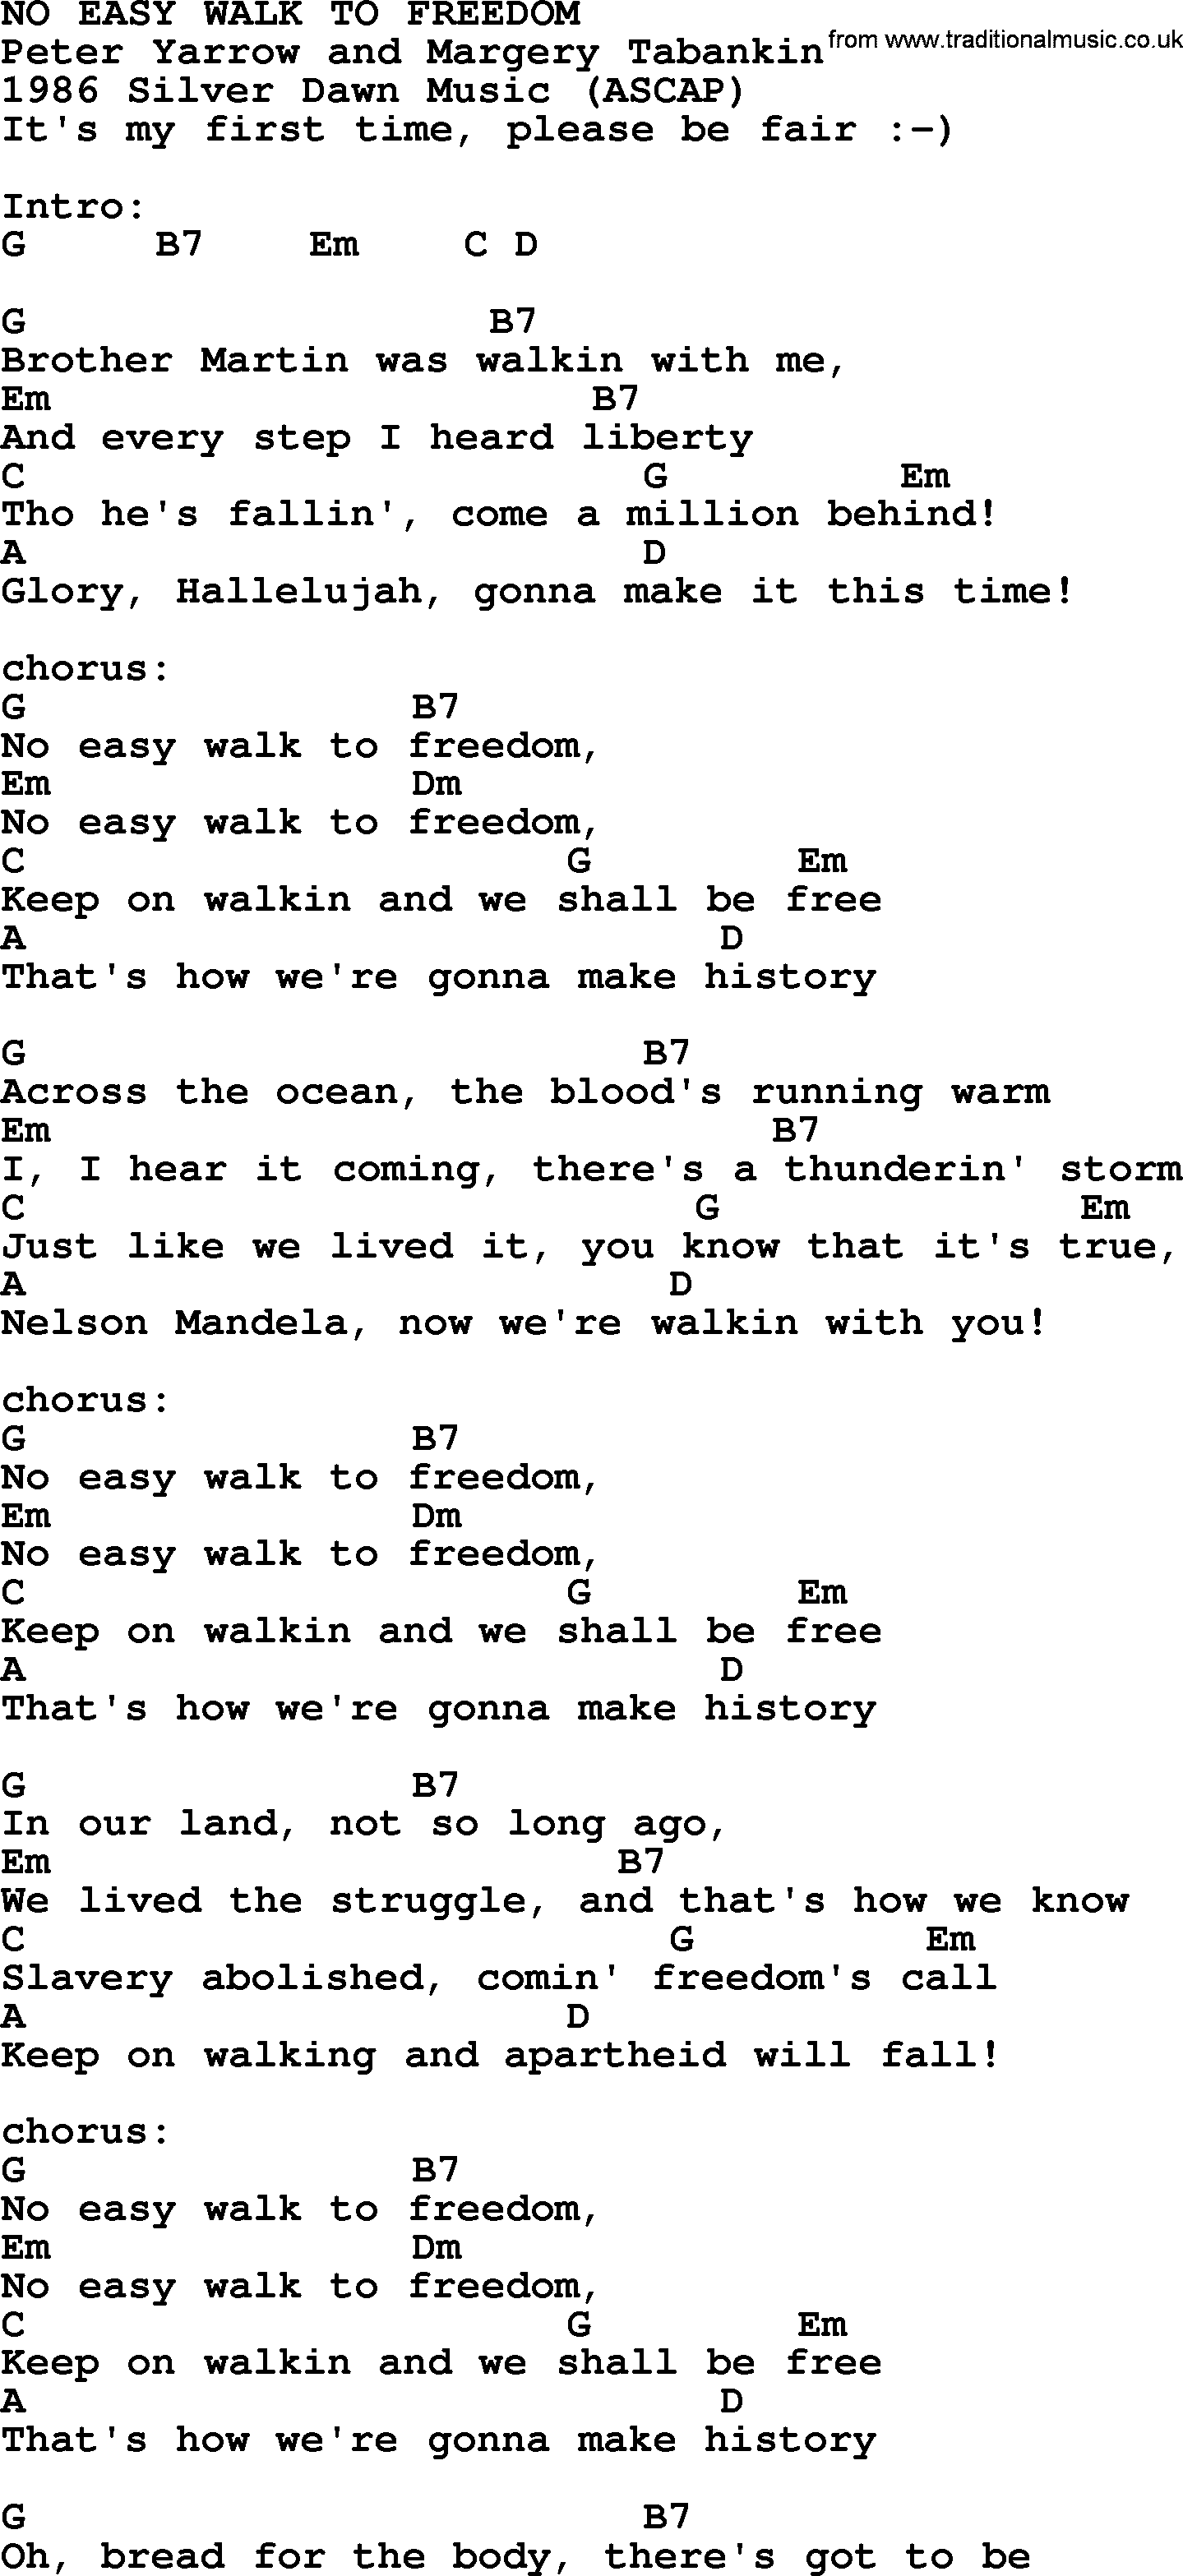 Peter, Paul and Mary song No Easy Walk To Freedom, lyrics and chords